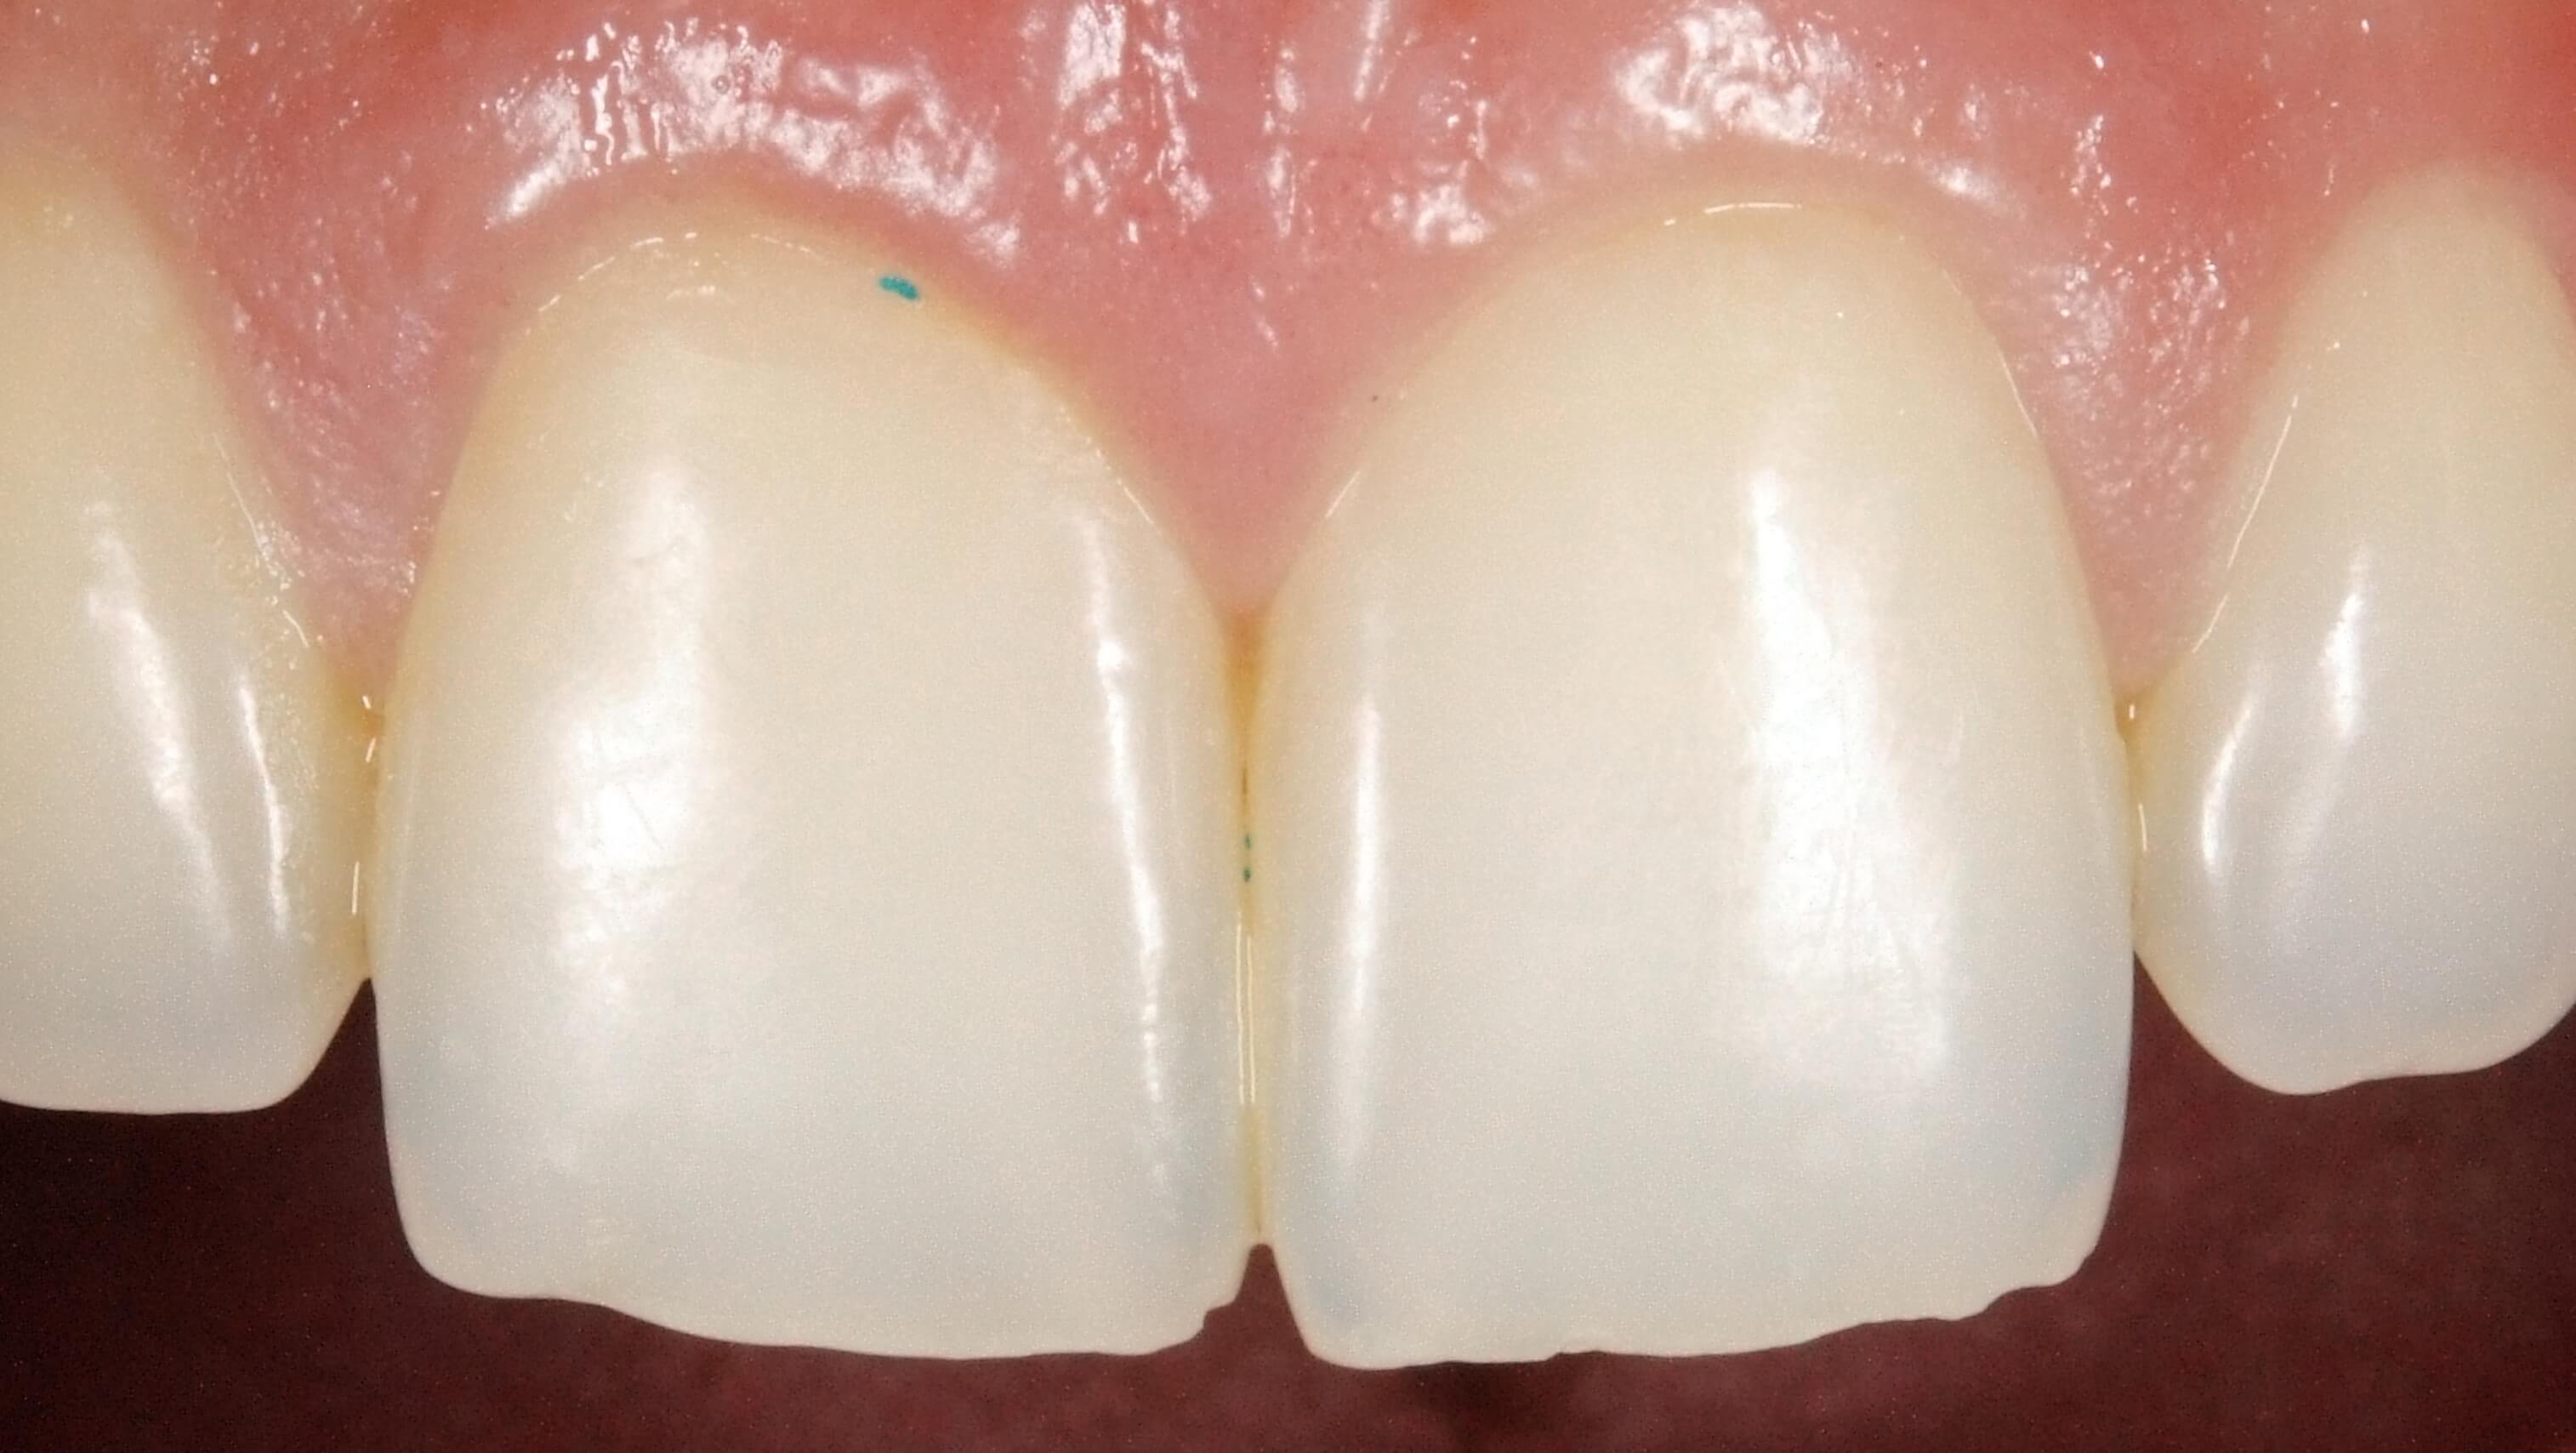 Notice the Microbeads Stuck in the gum line and between the two front teeth.